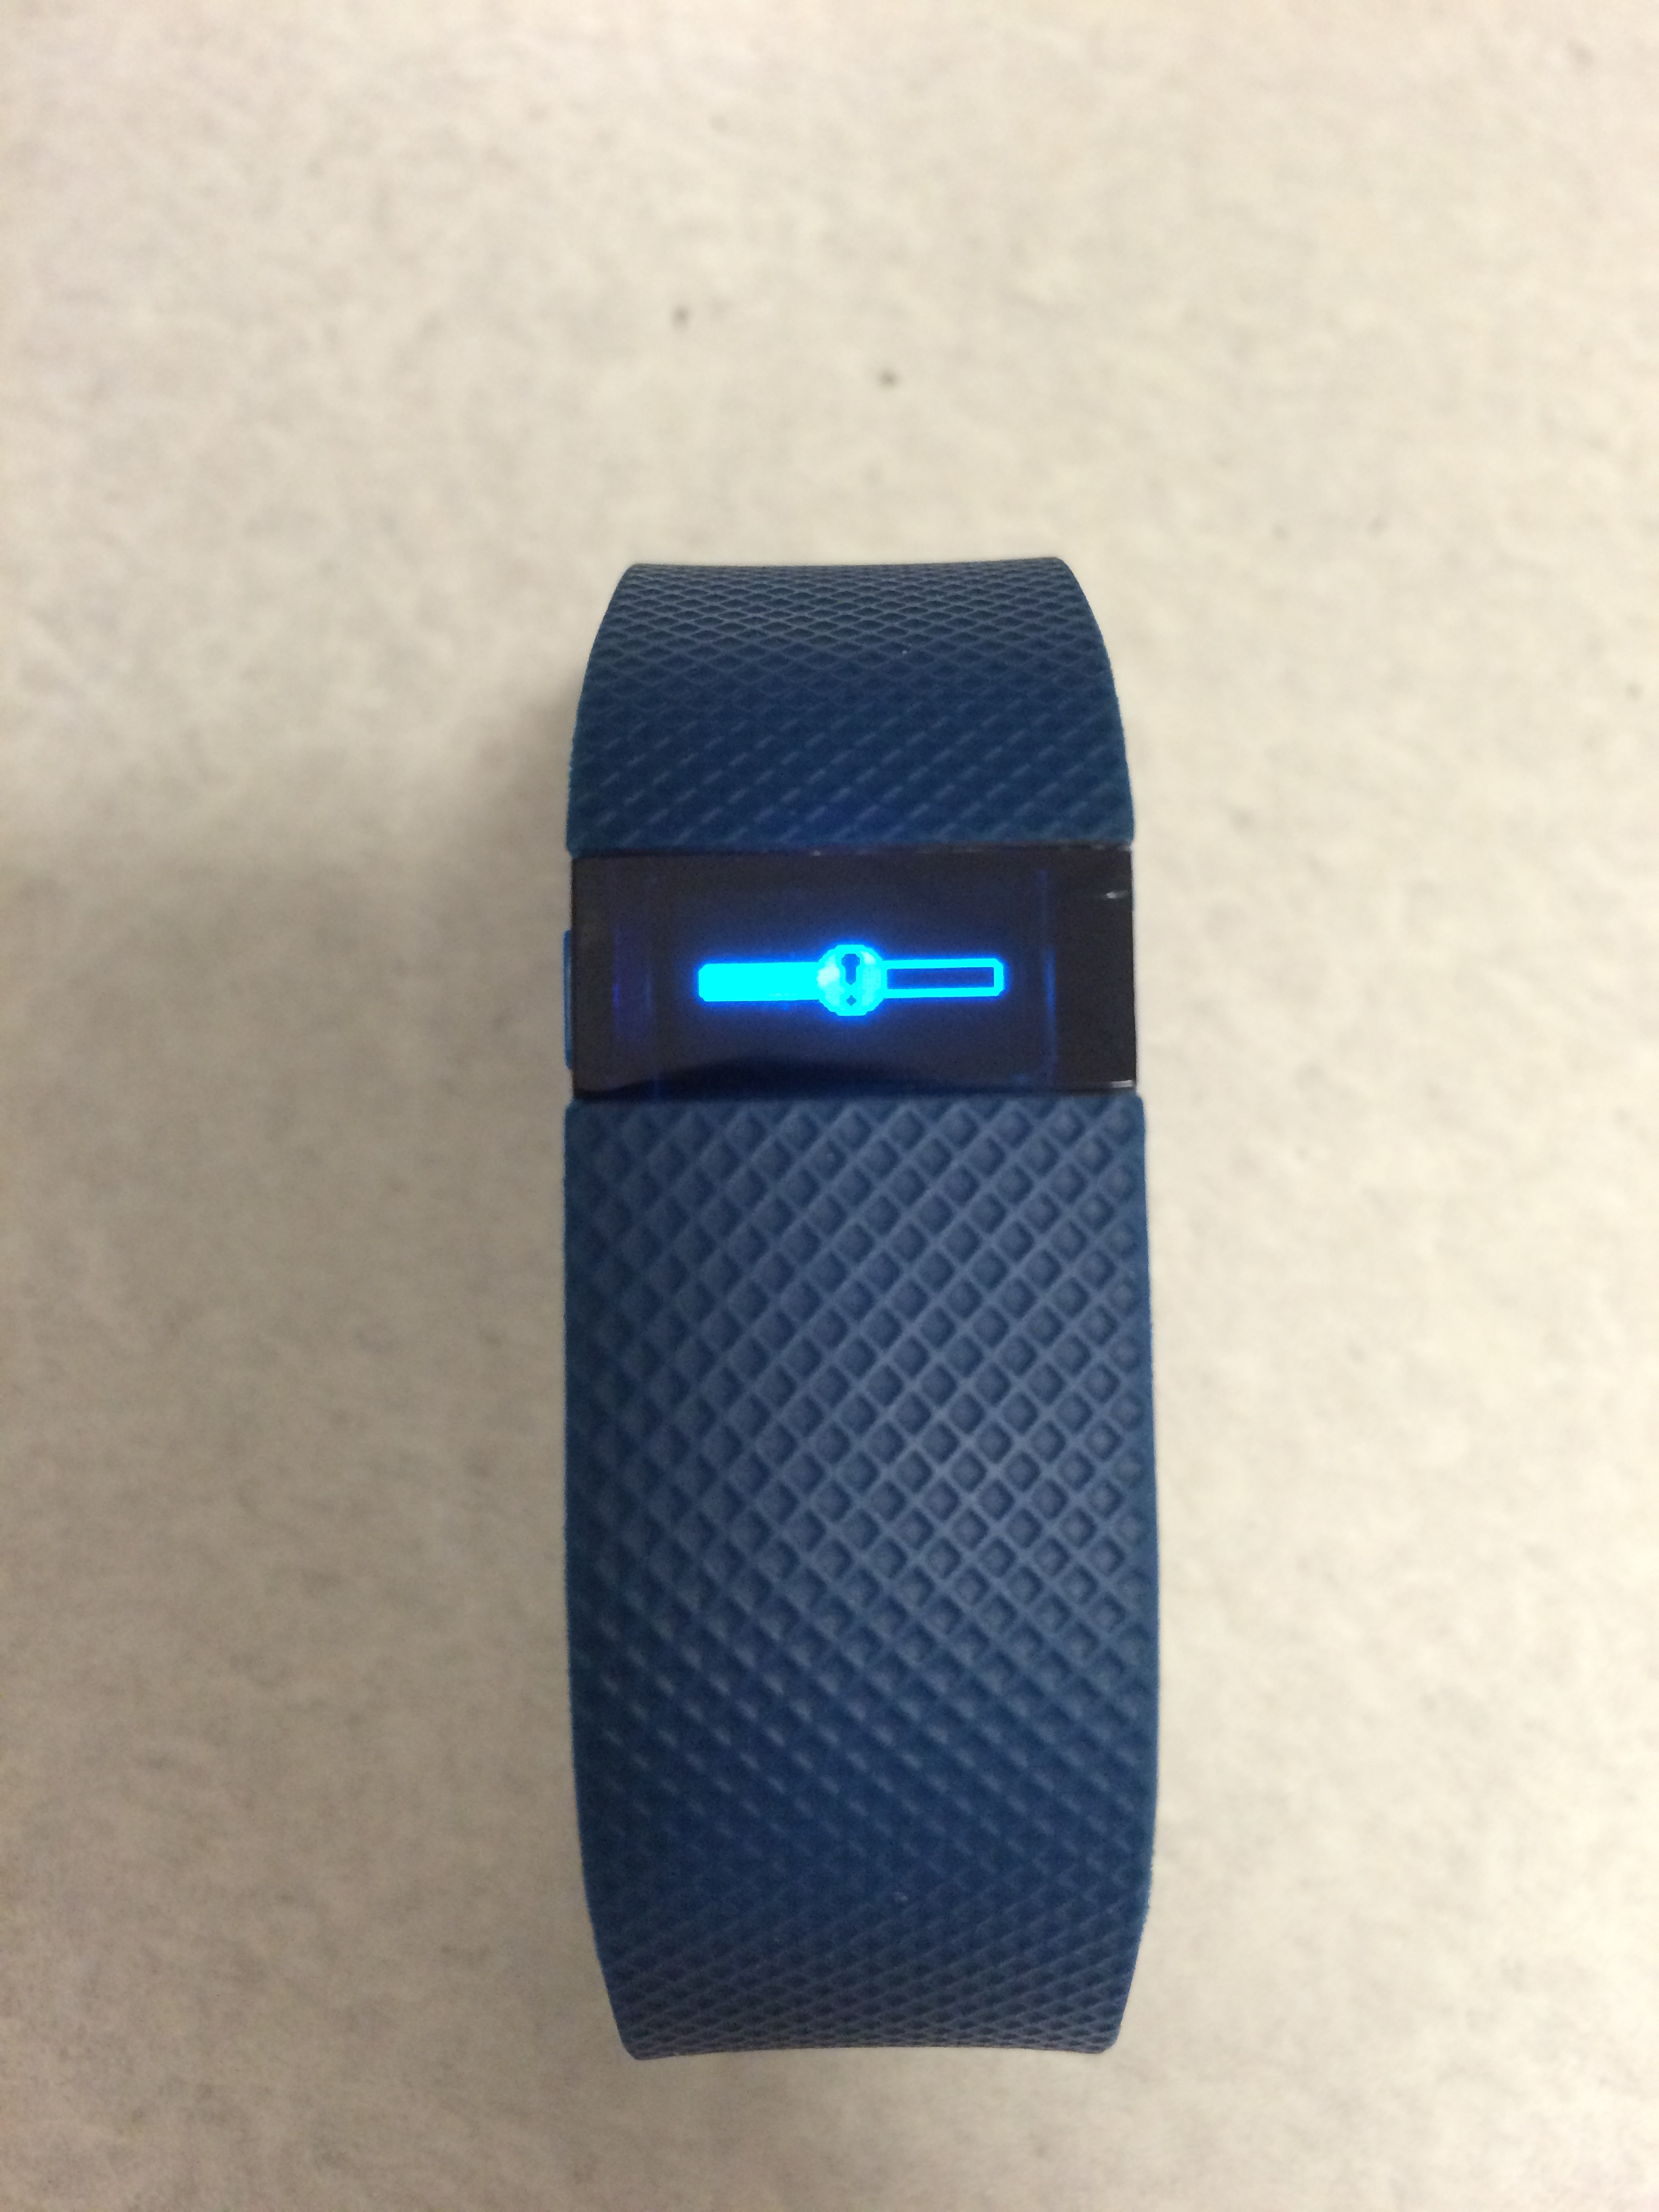 fitbit battery exclamation mark